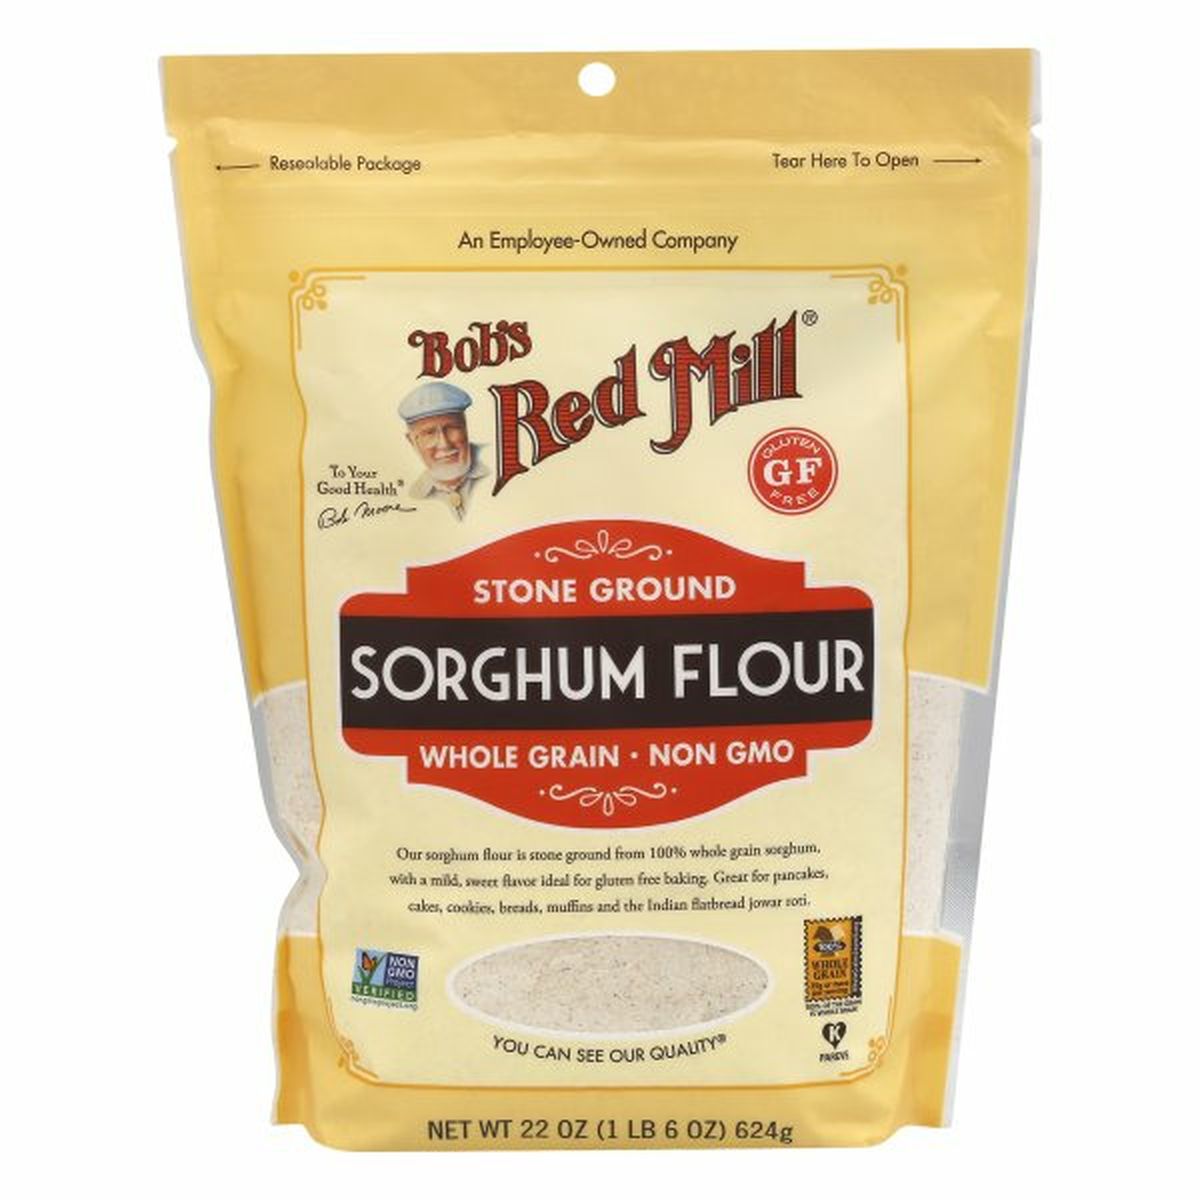 Calories in Bob's Red Mill Sorghum Flour, Stone Ground